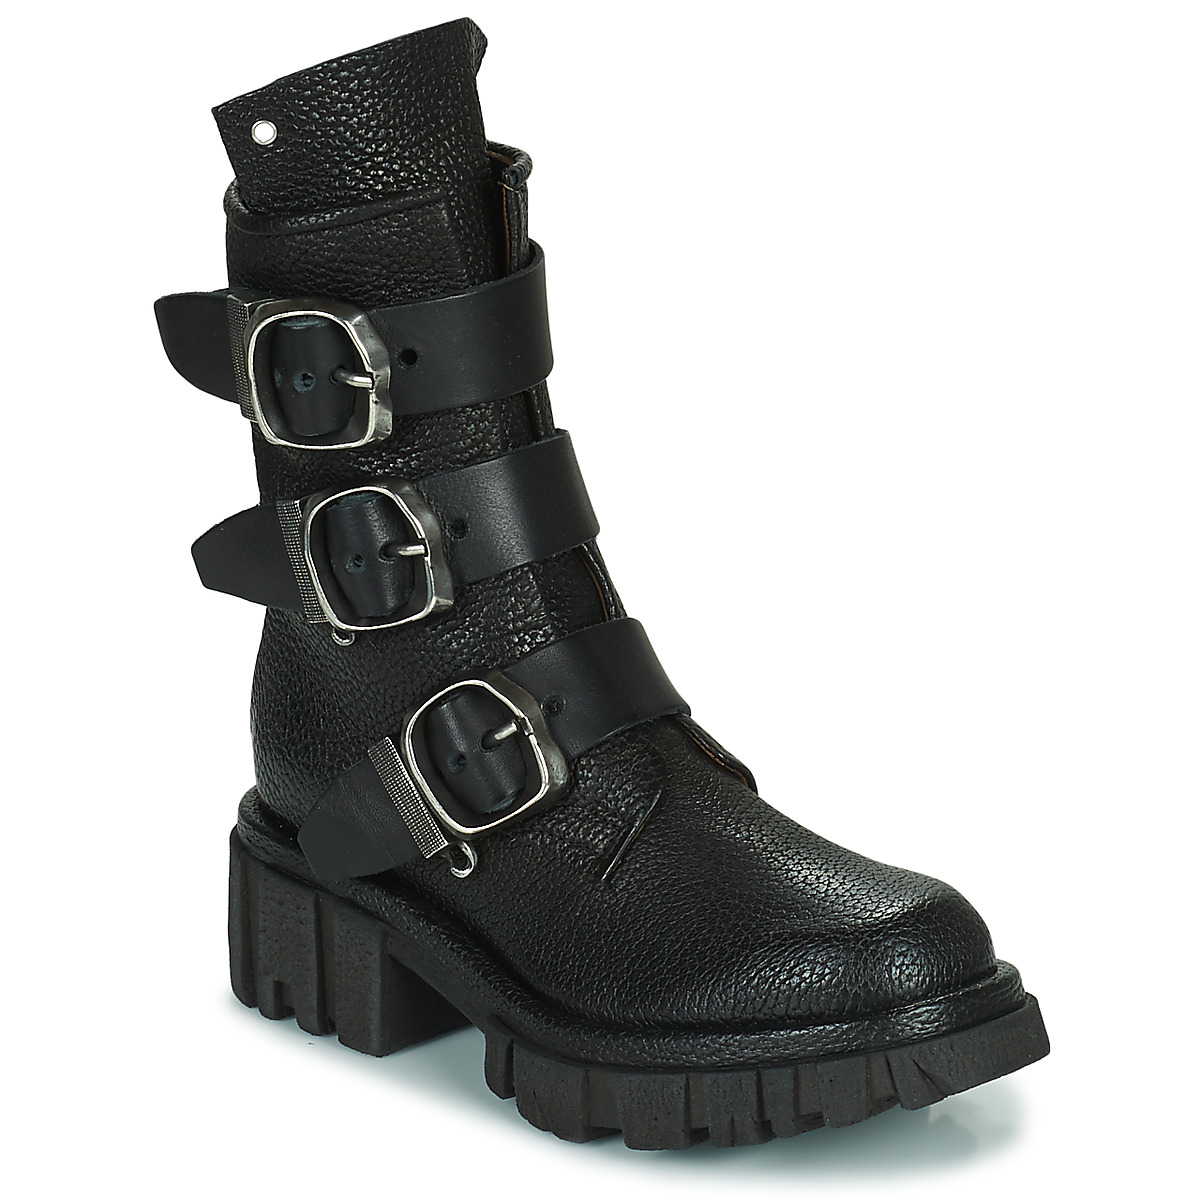 Airstep / A.S.98 Noir HELL BUCKLE w19asses